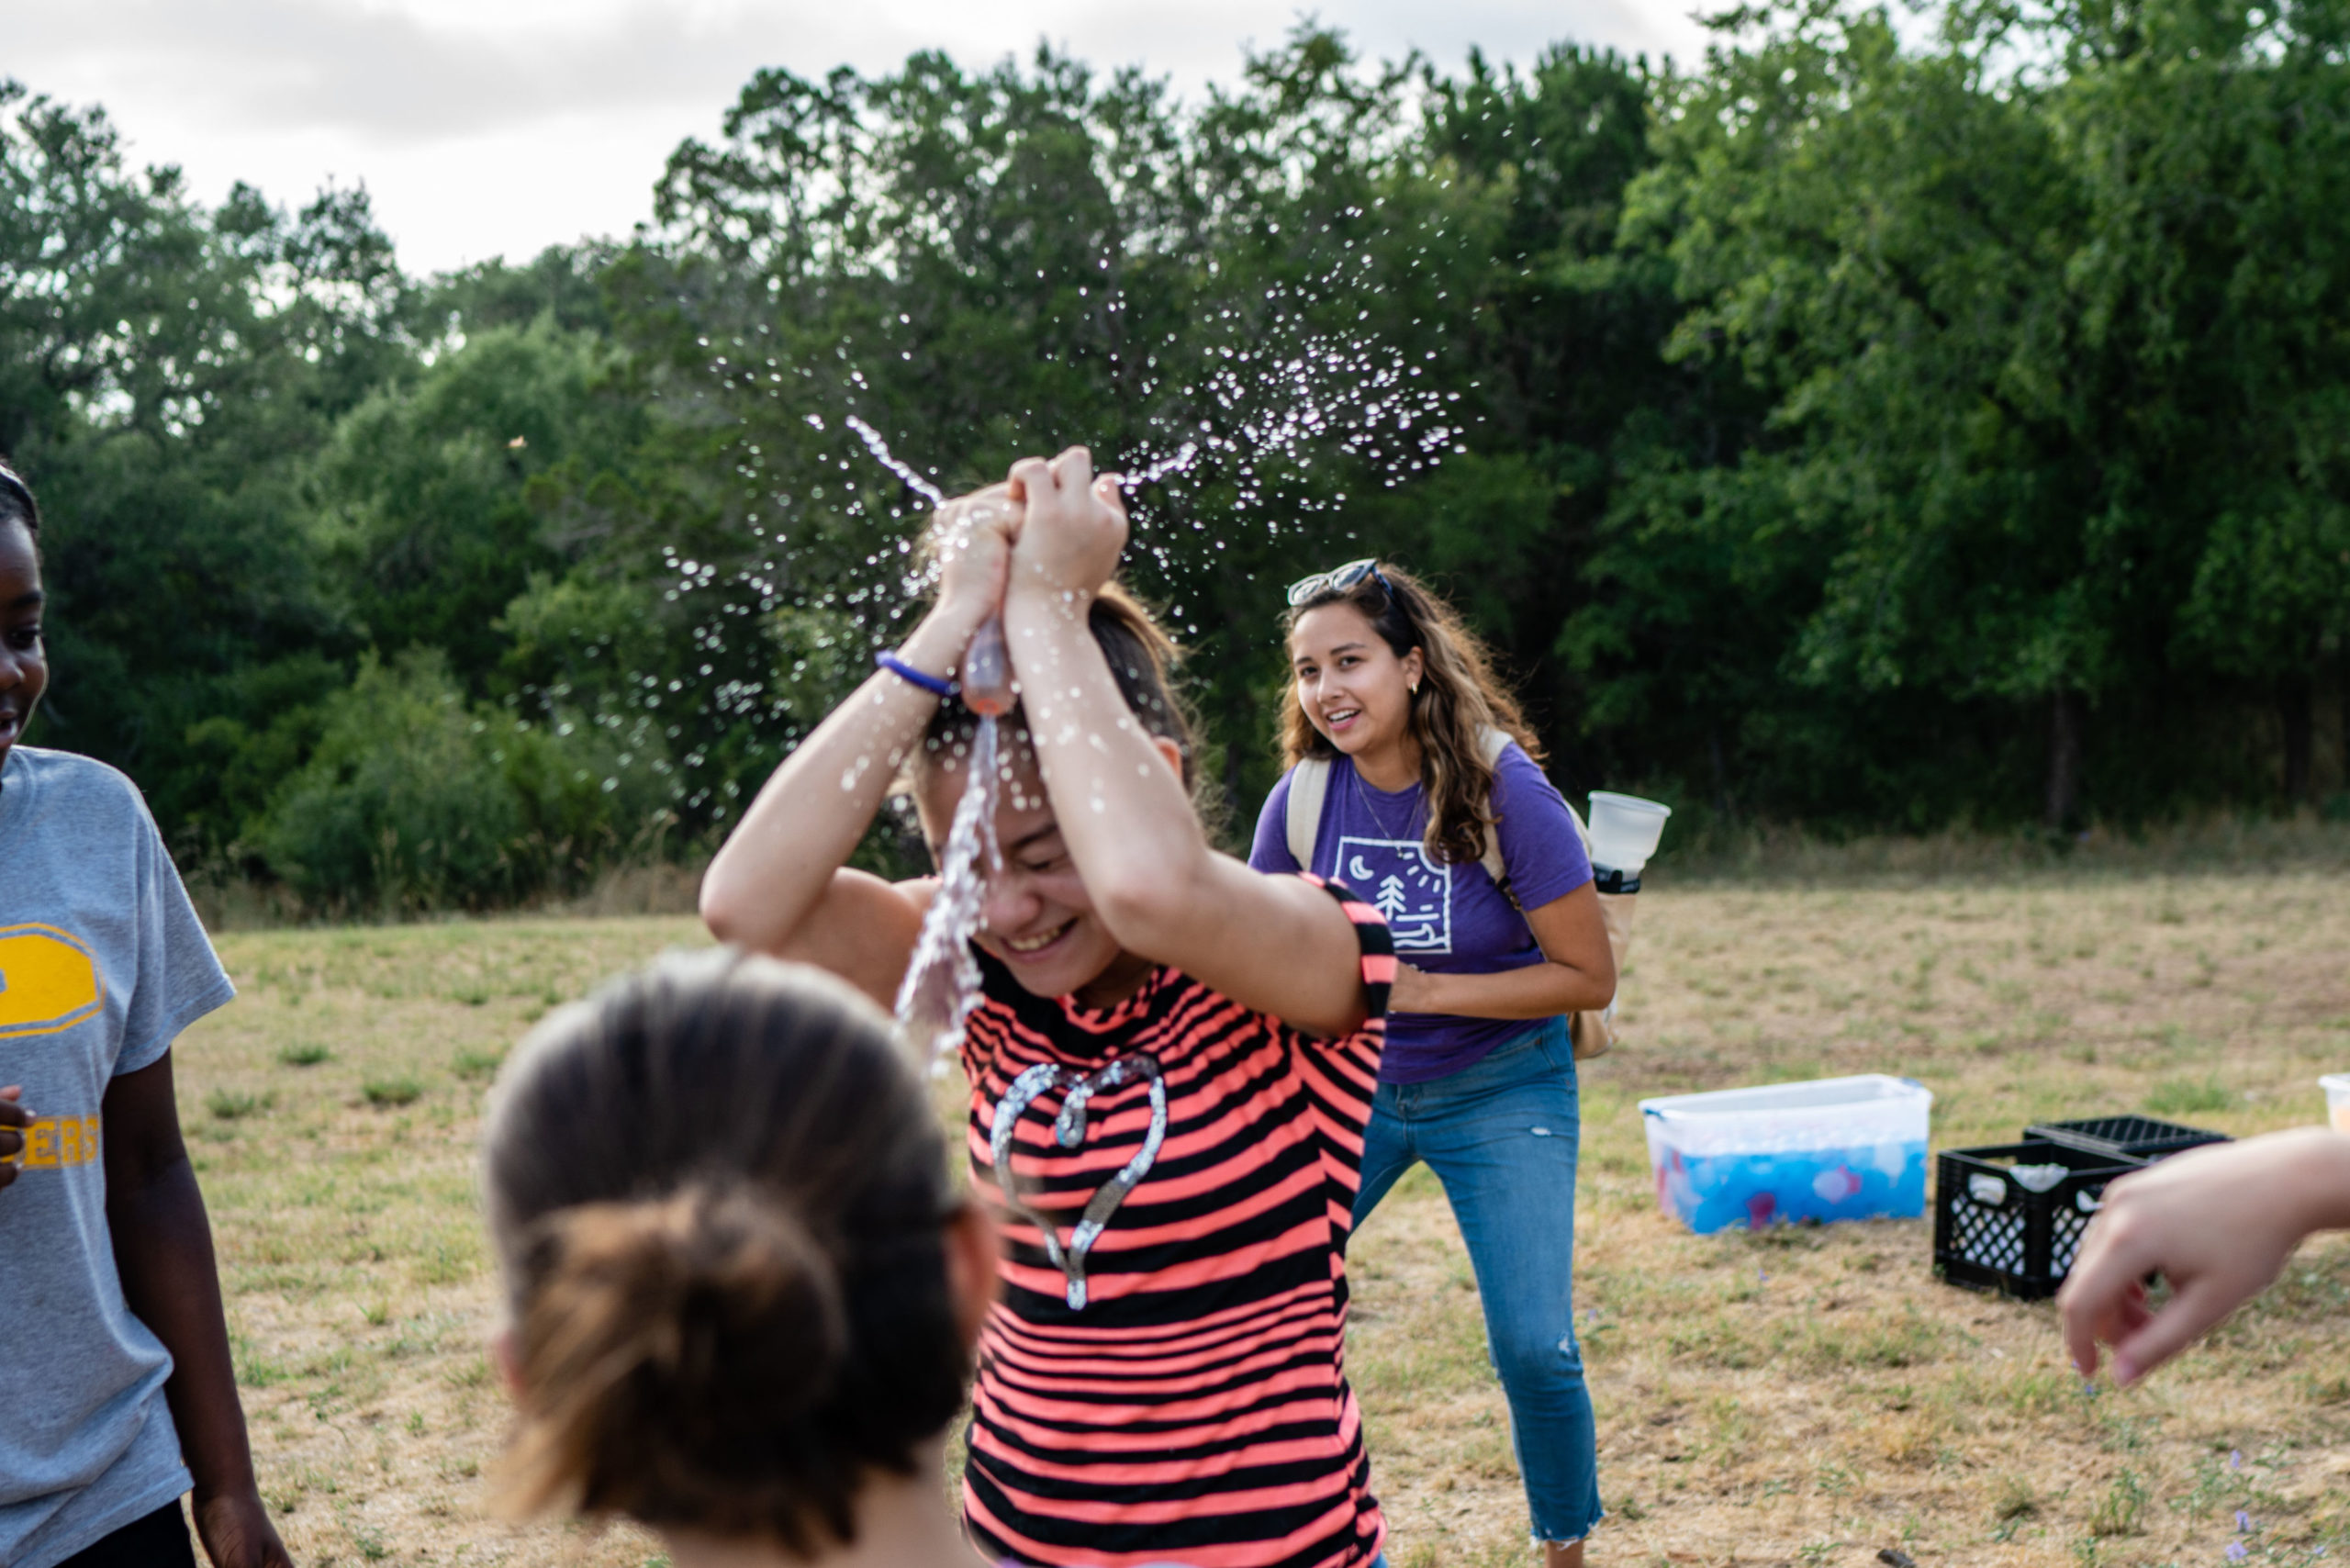 Two campers playing with water balloons at Austin Sunshine Camps